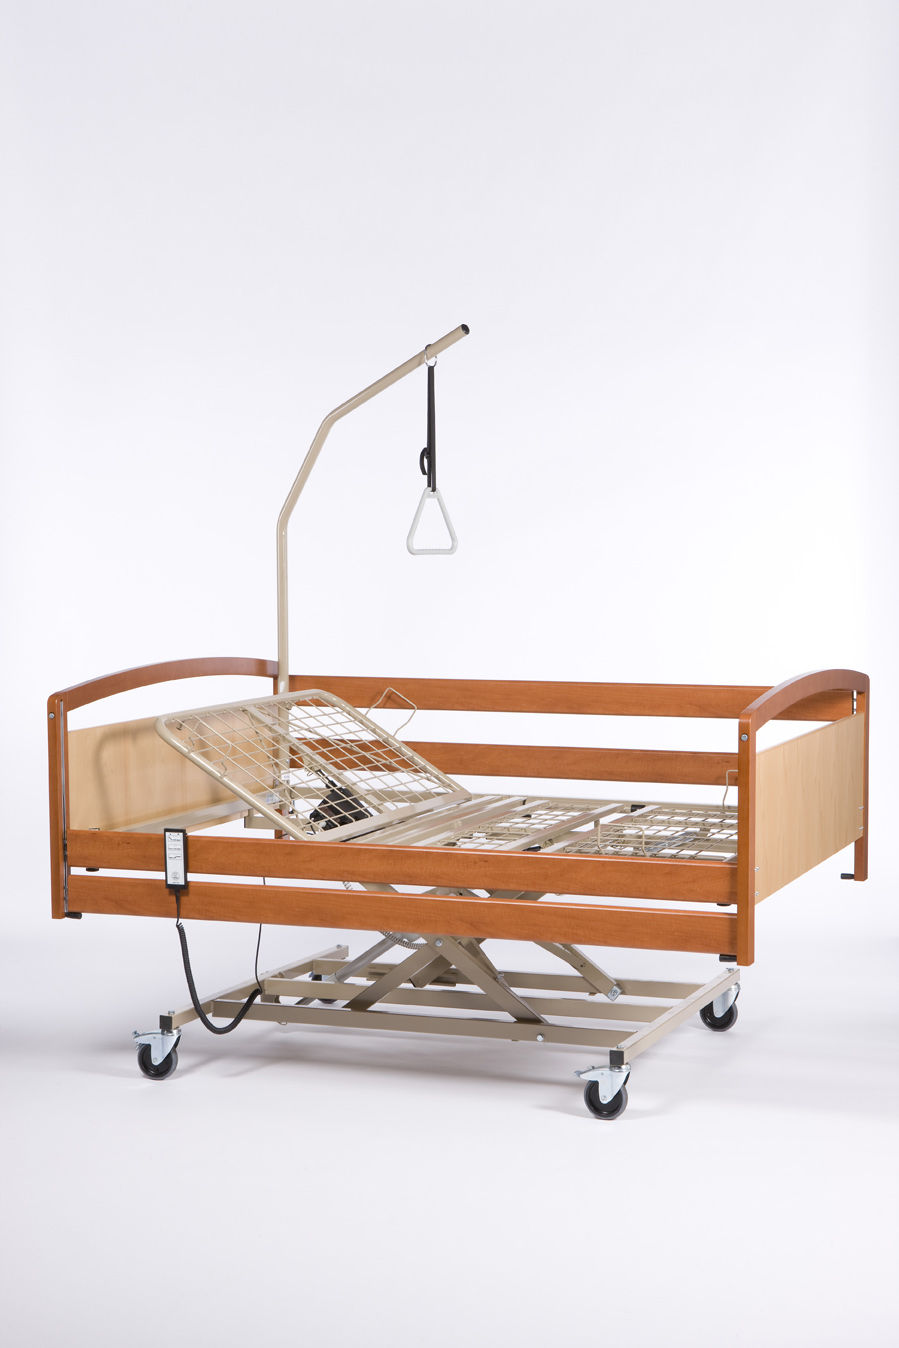 Hospital Beds For Overweight Users